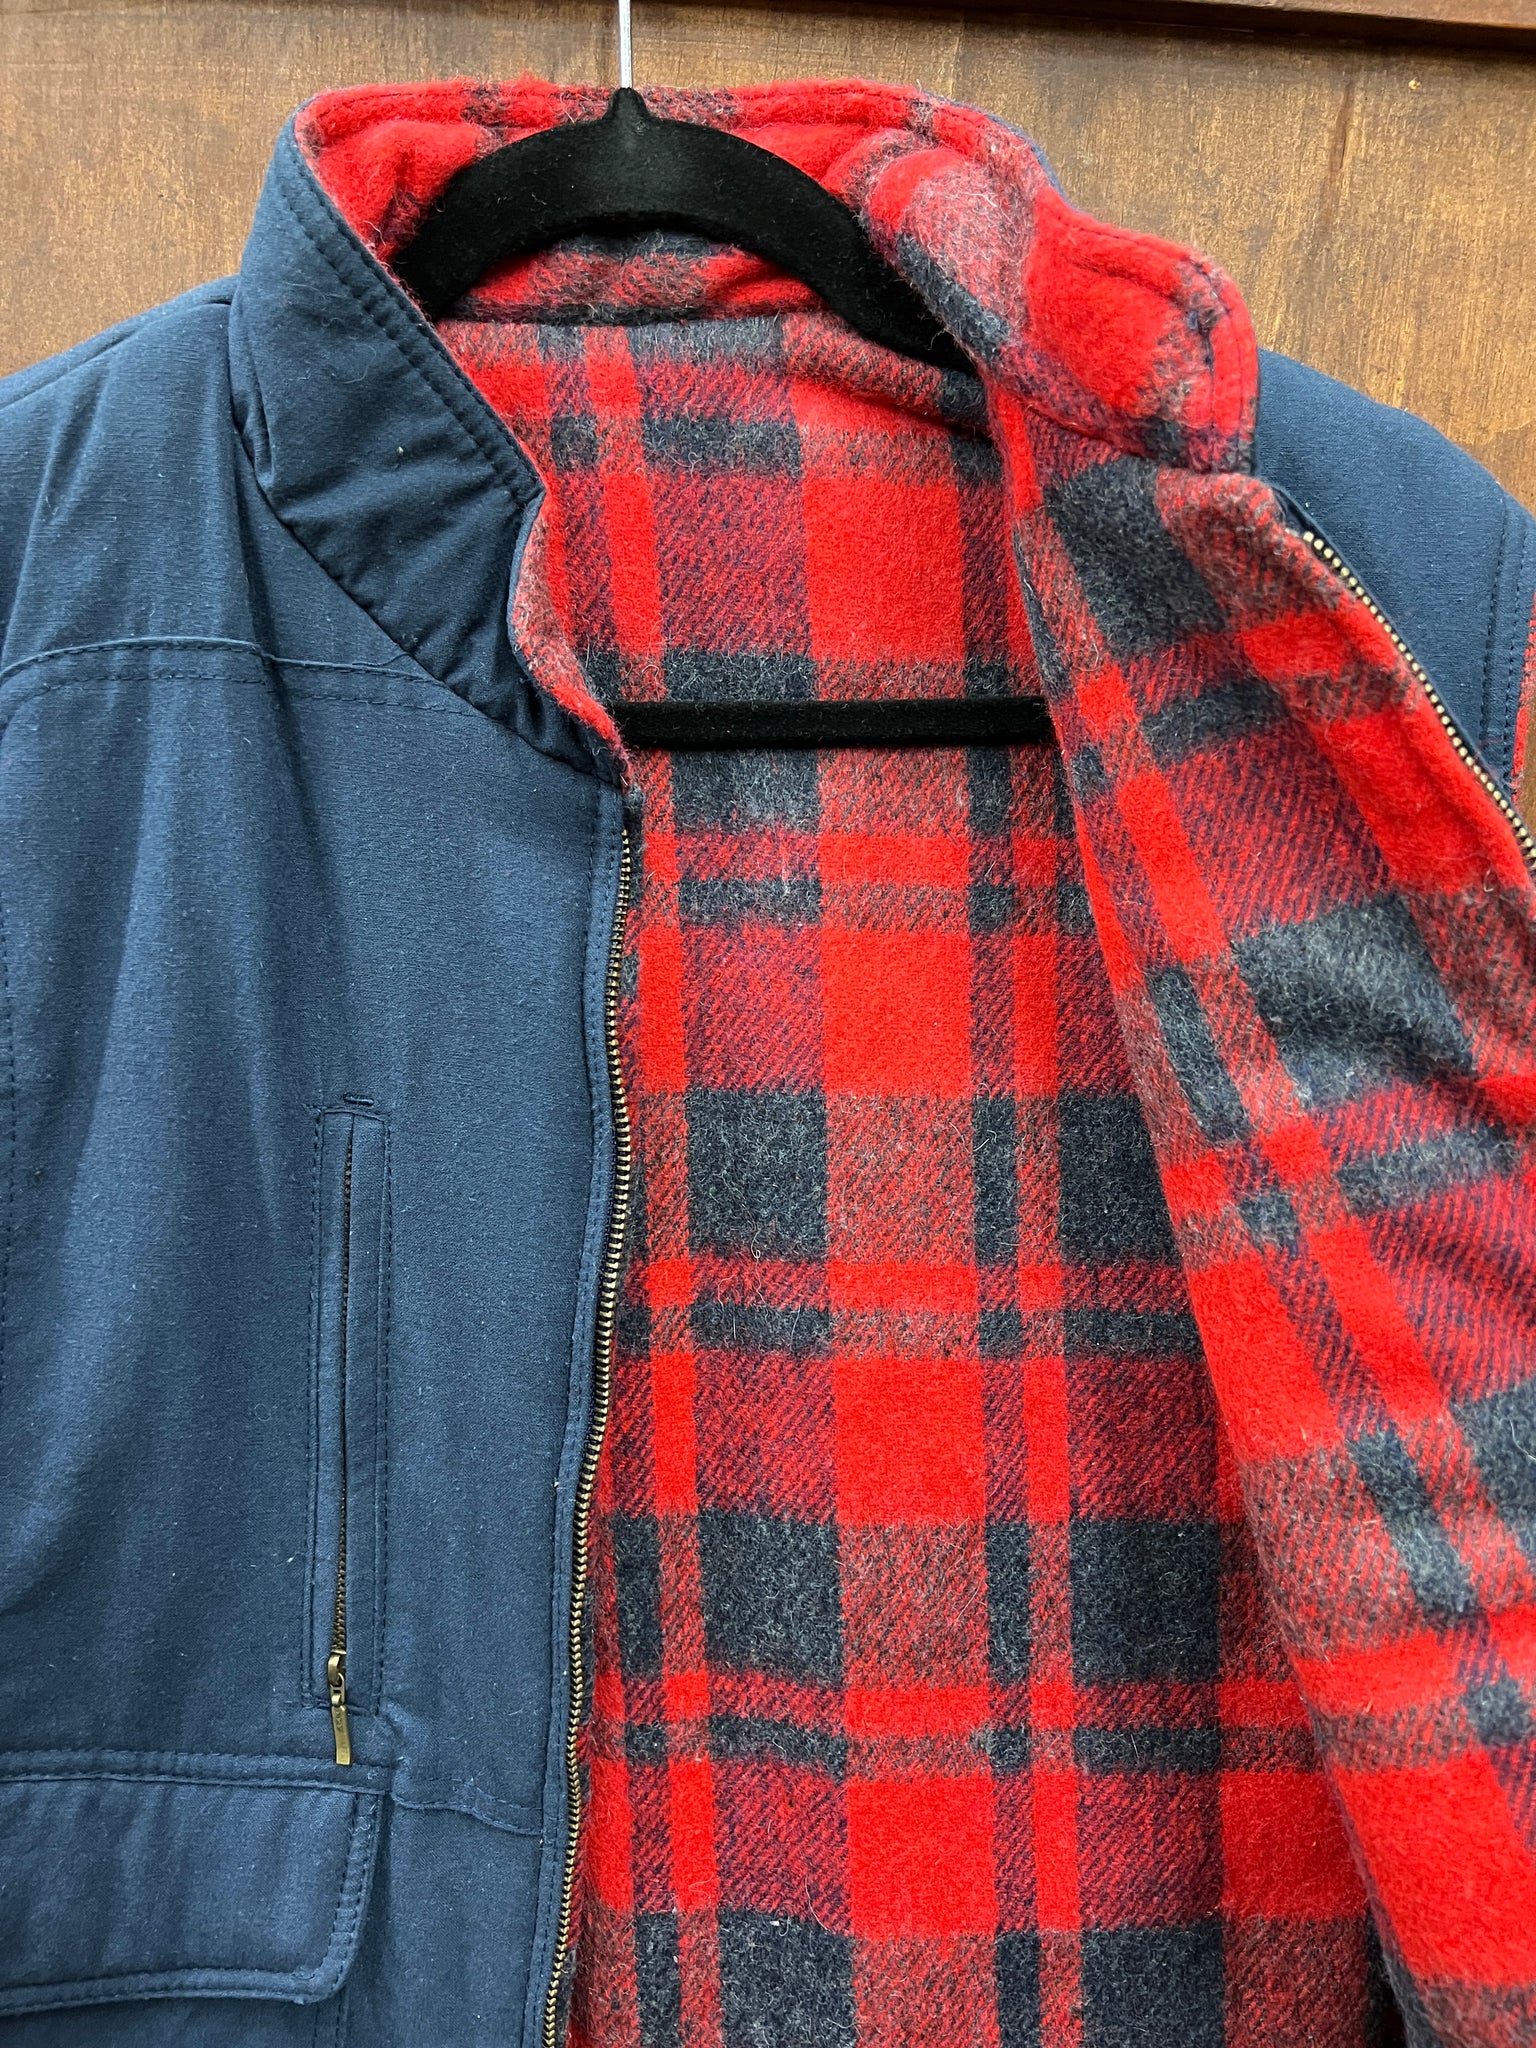 1980s MENS JACKET-VEST- navy/ red plaid lining padded